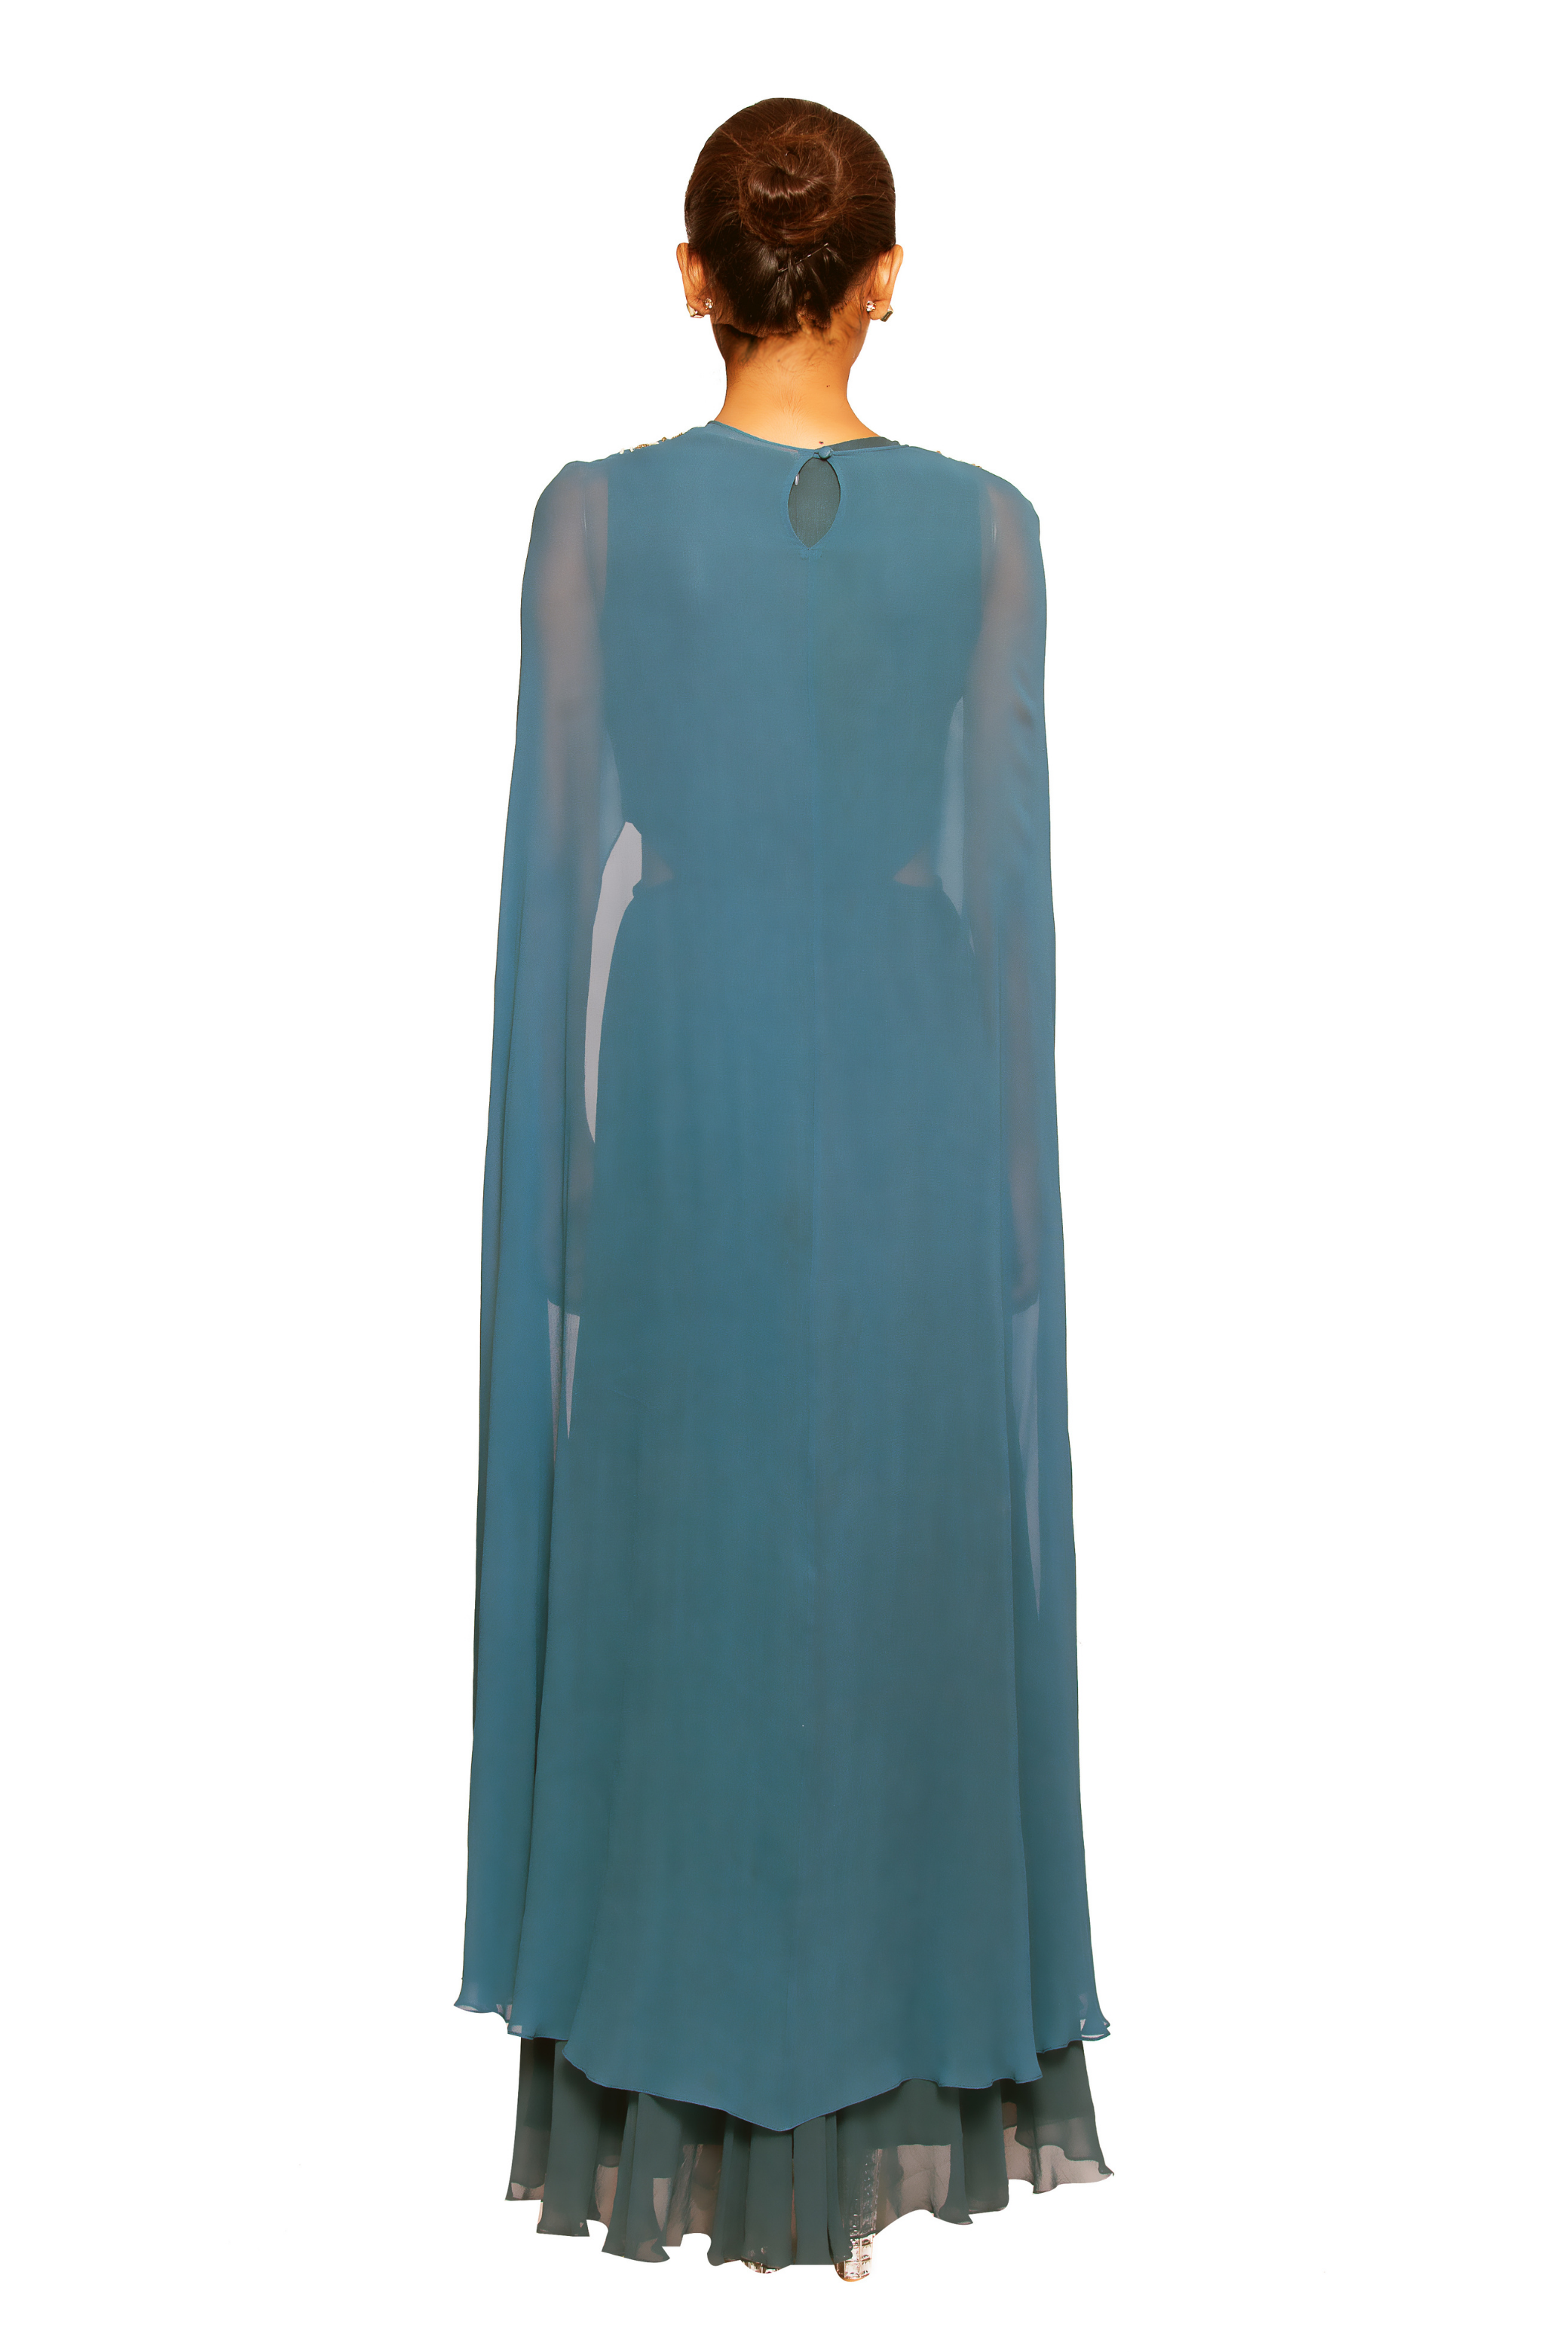 asymmetric gown in teal color,